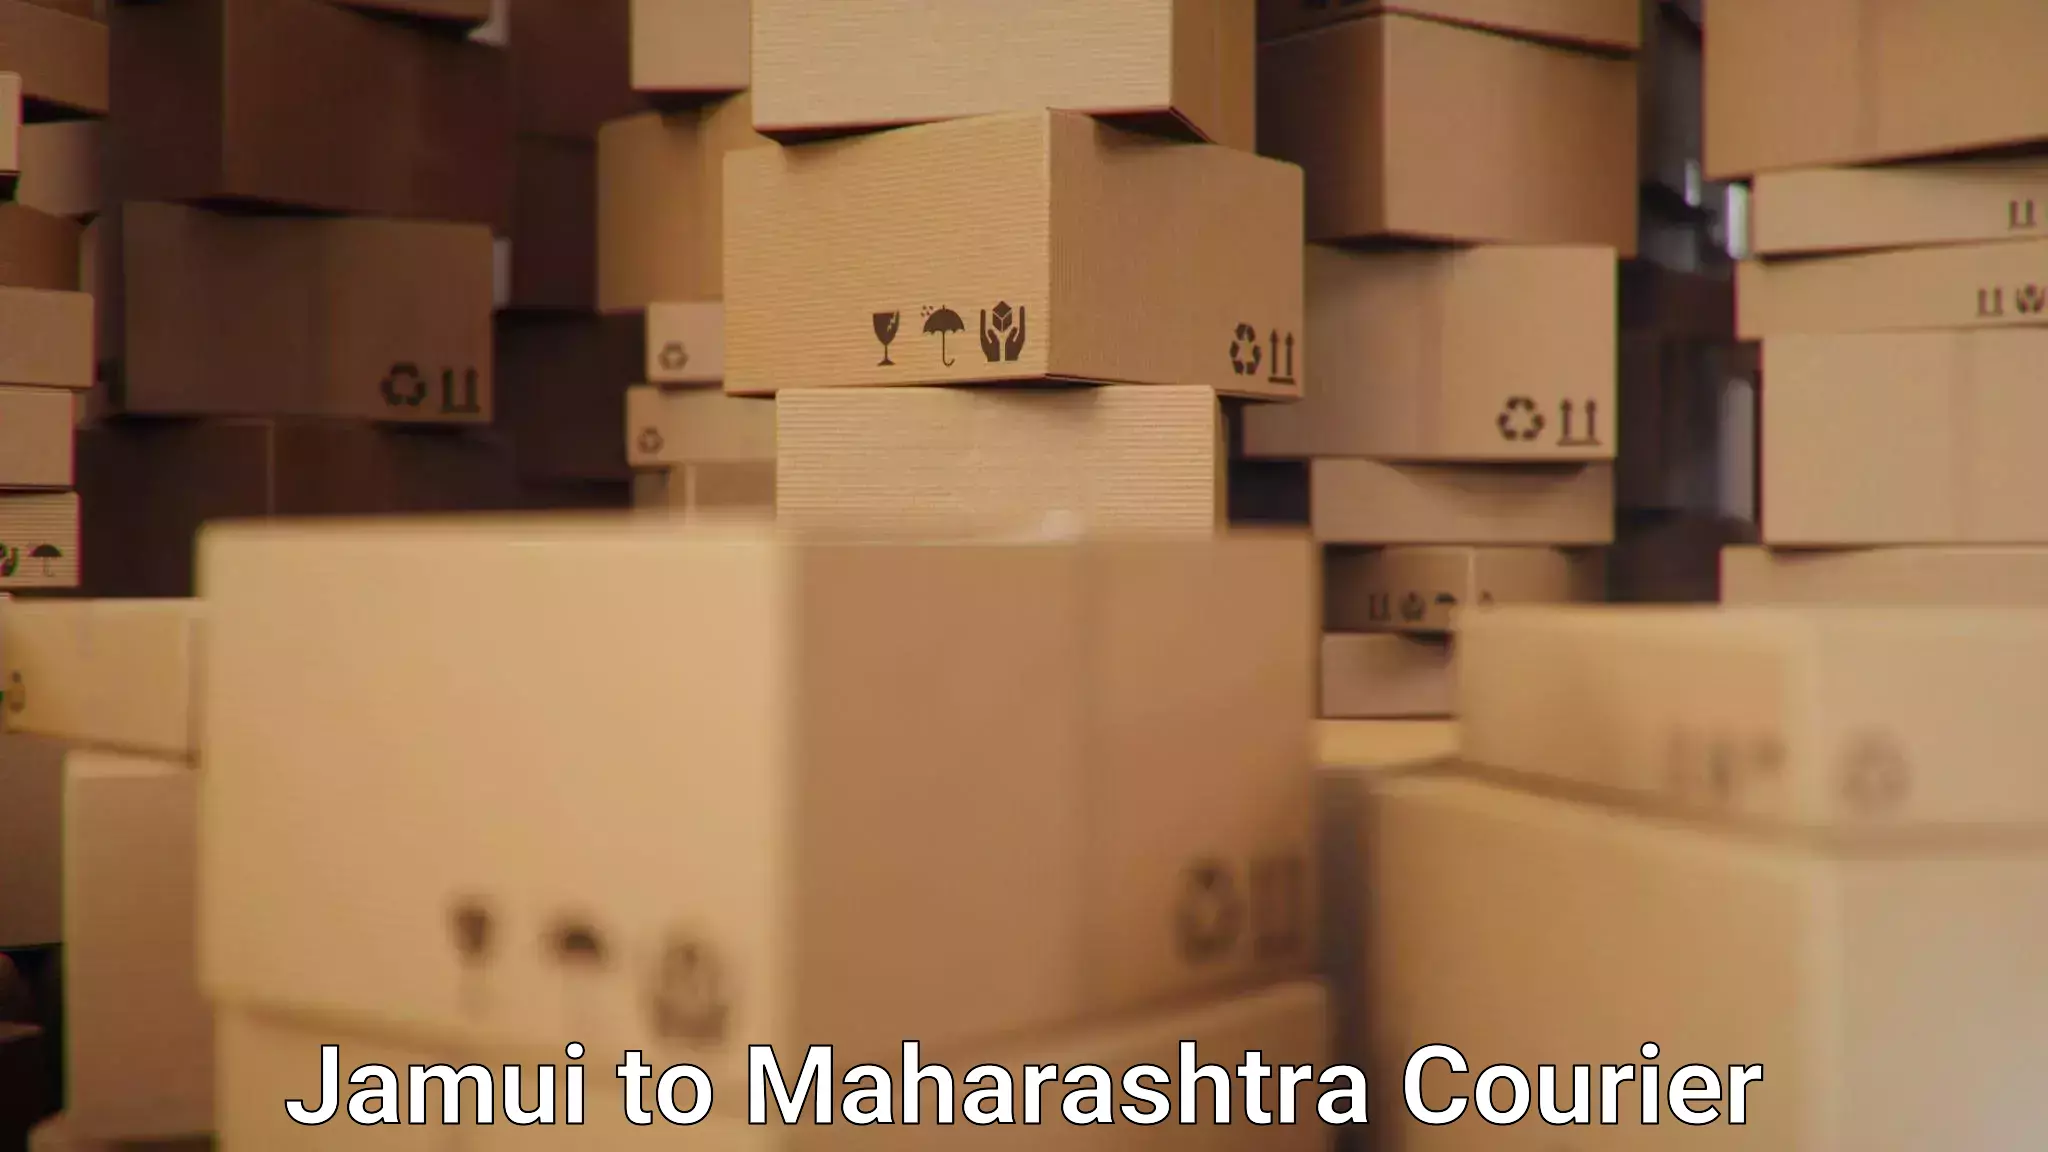 Parcel service for businesses Jamui to Dhule